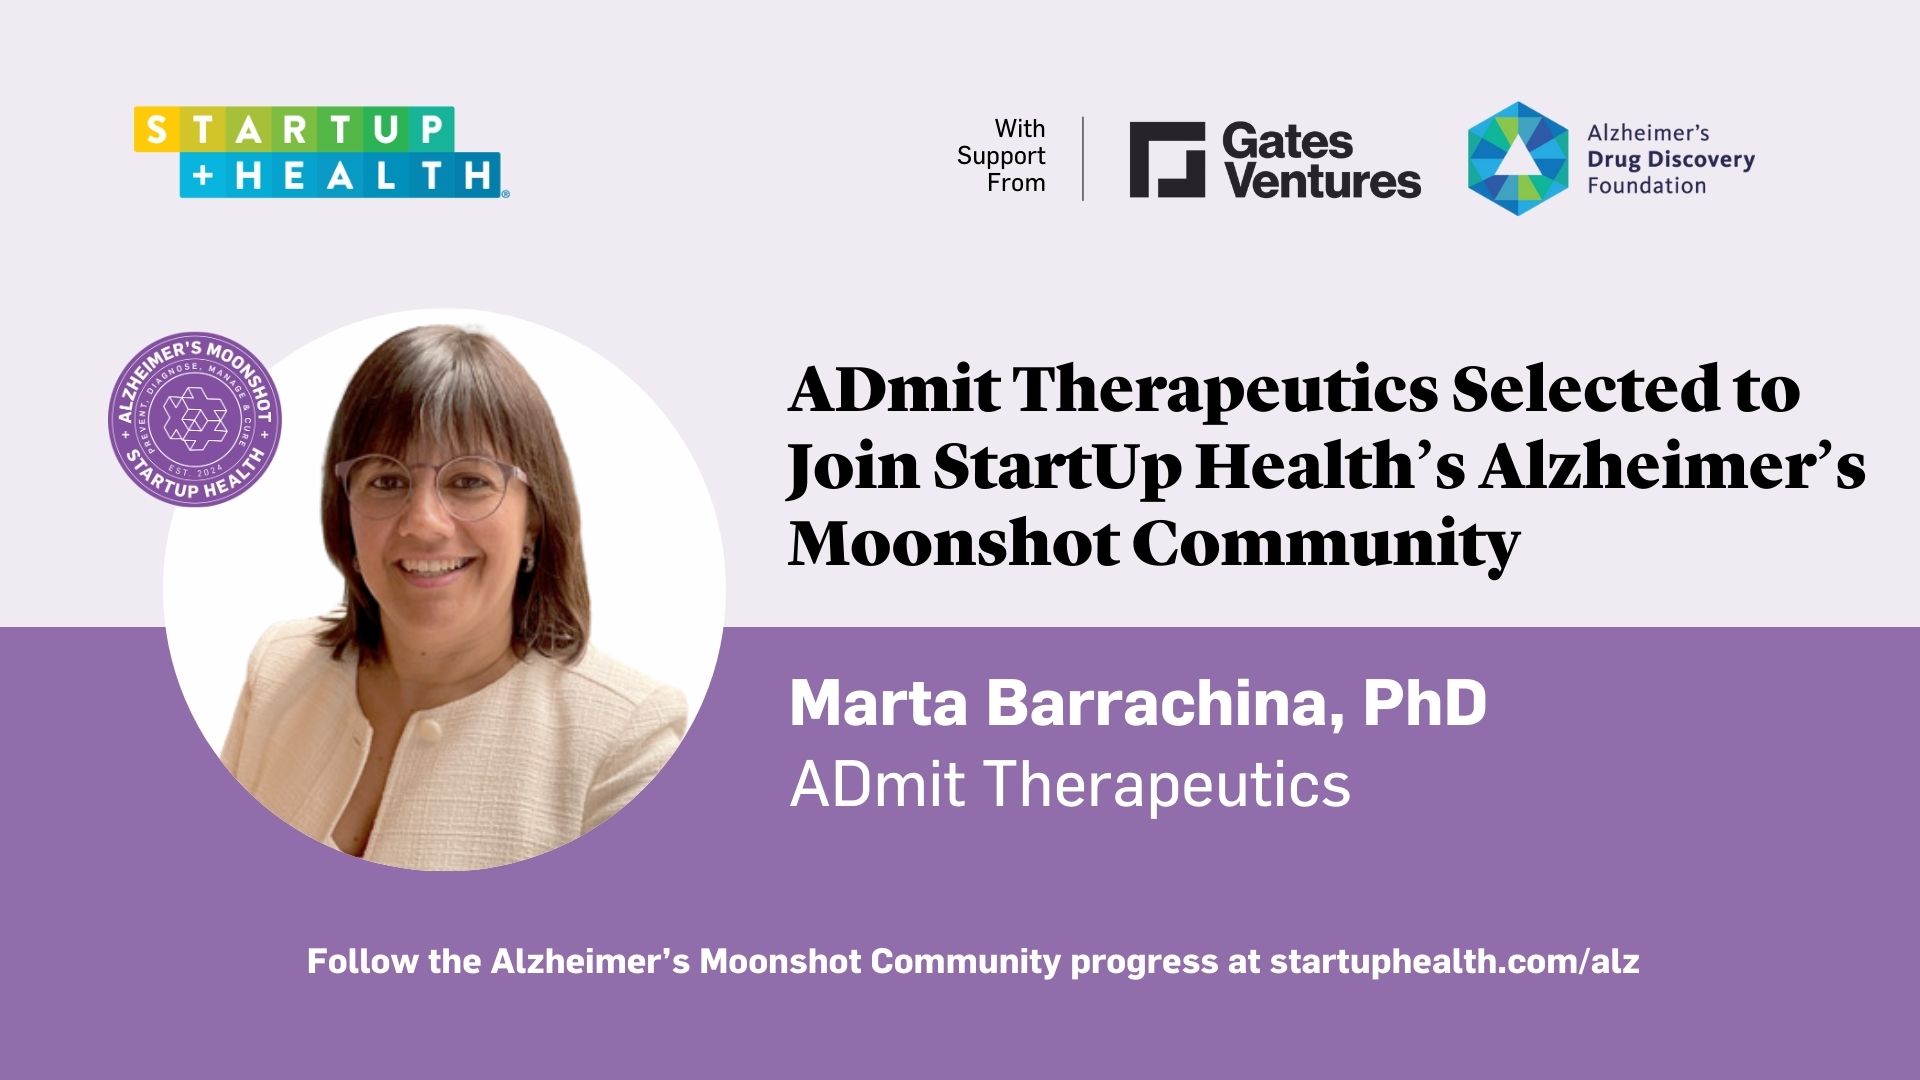 ADmit Therapeutics Selected for StartUp Health’s Alzheimer’s Moonshot